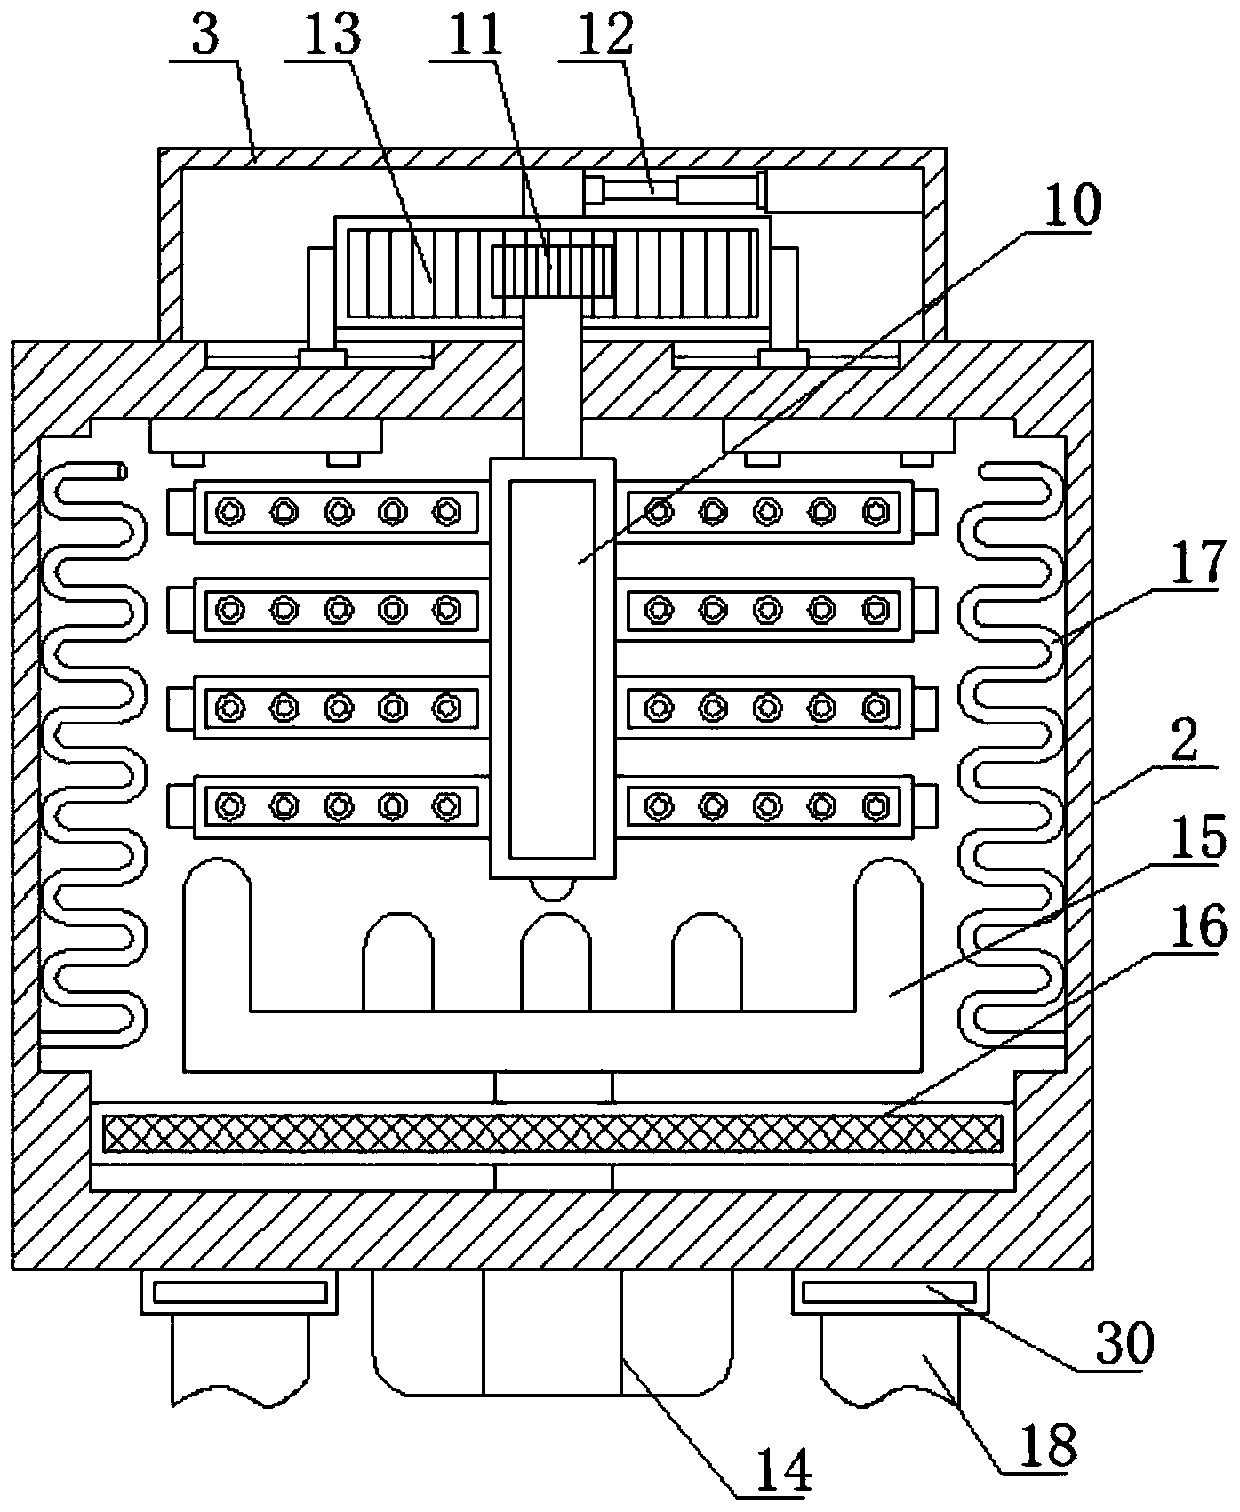 Chemical-adding drip irrigation device for agriculture